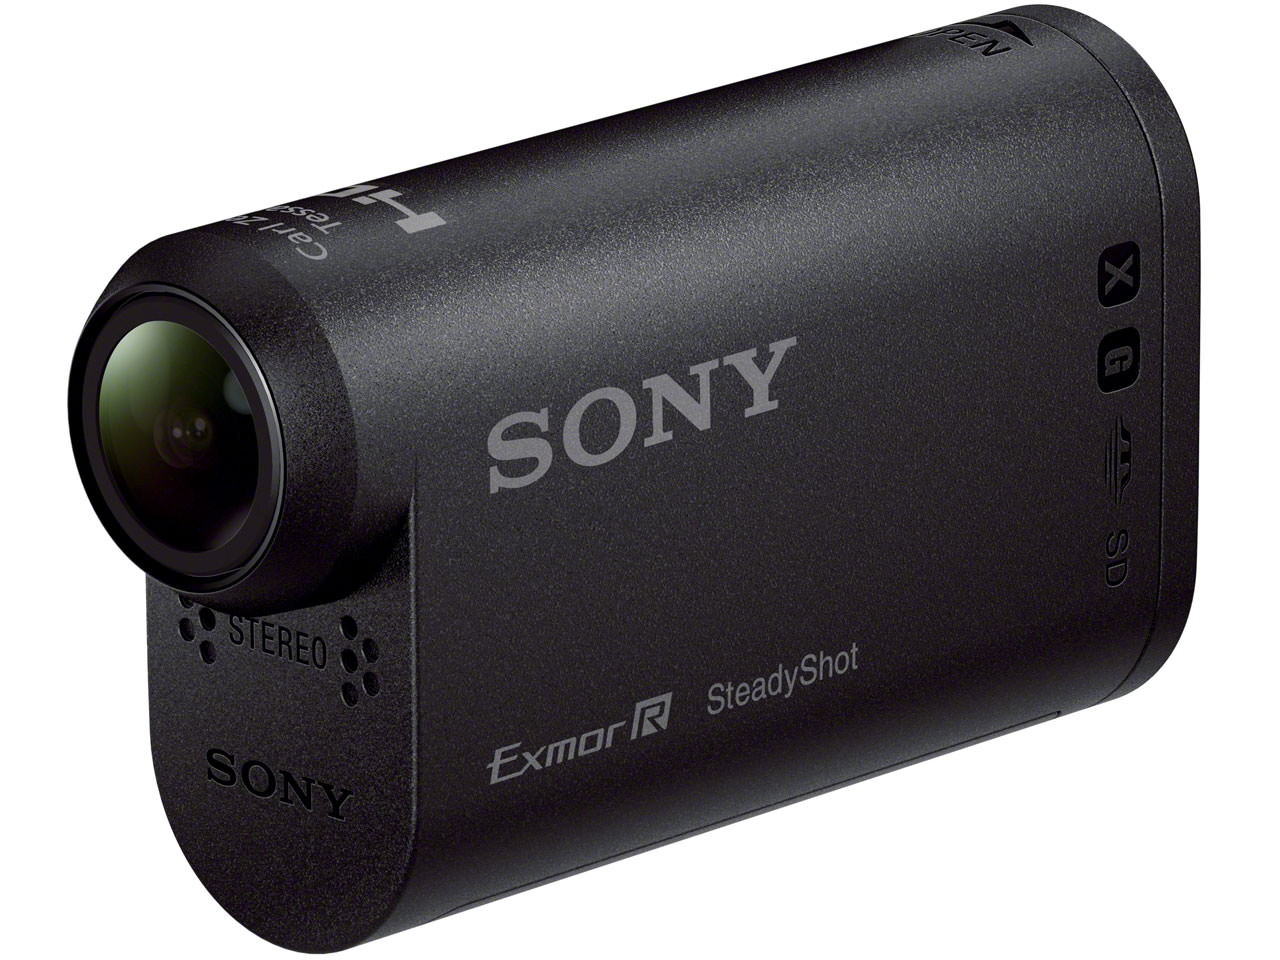 SONY HDR-AS15